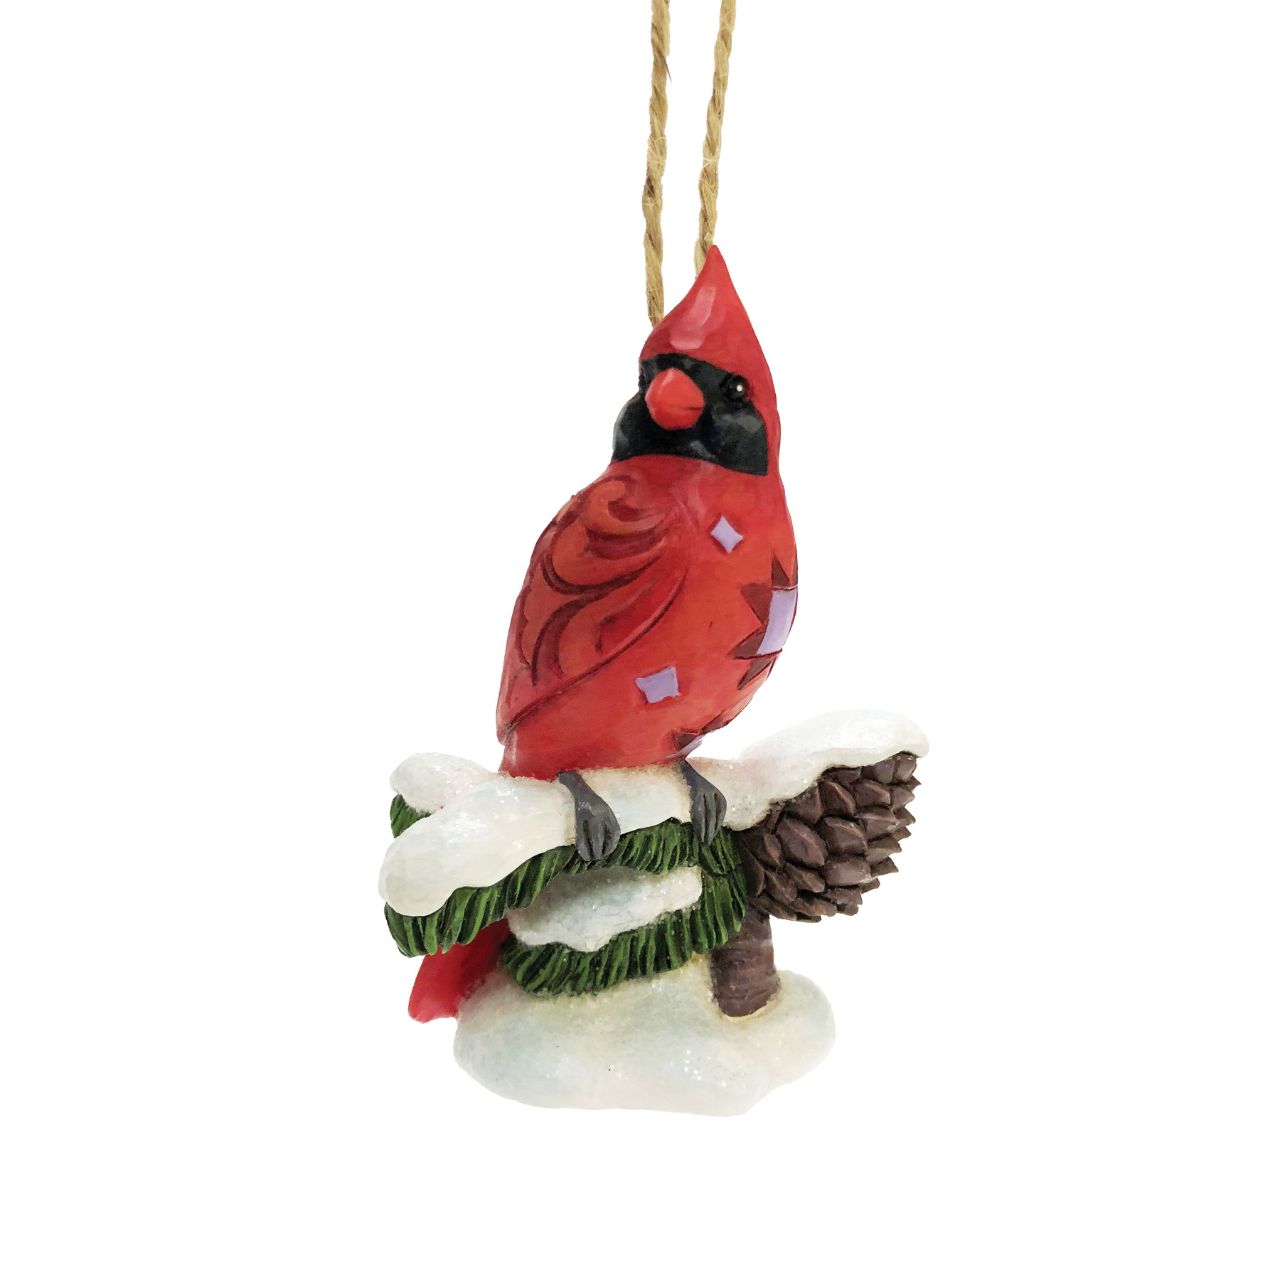 Carving Cardinal Hanging Ornament by Jim Shore  Celebrate Christmas with this beautiful hand crafted and hand painted Carving Cardinal on Snowy Branch Hanging Ornament. Decorate your tree this Christmas with this Carving Cardinal on Snowy Branch Hanging Ornament.